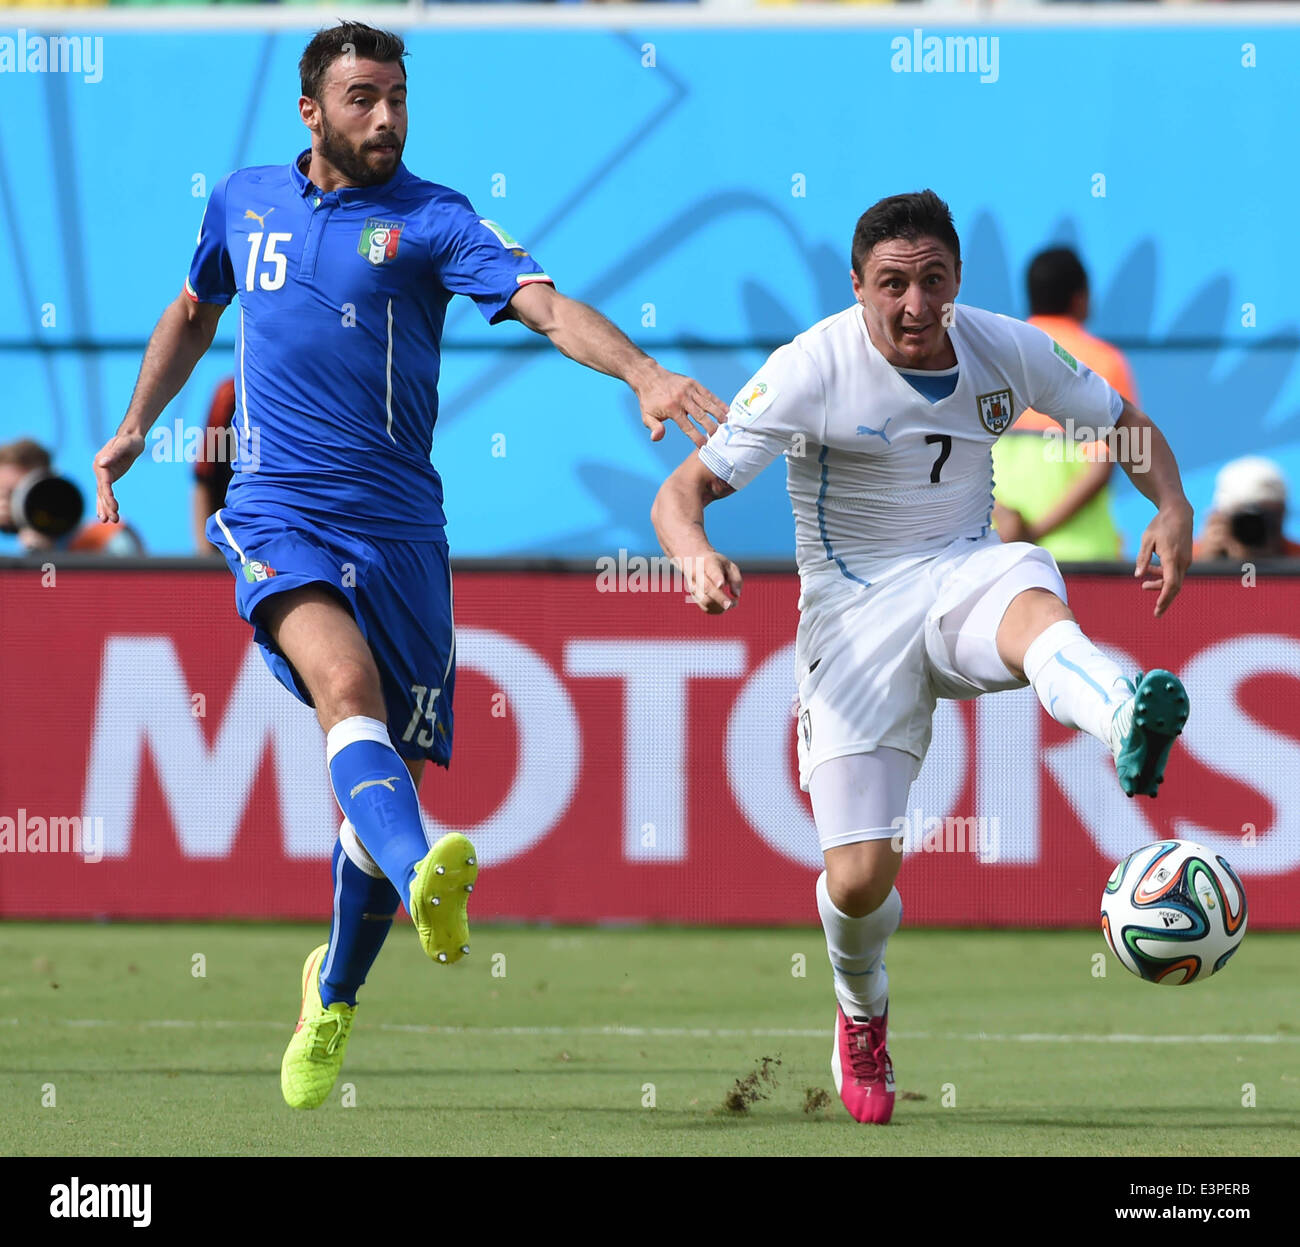 Natal, Brazil. 24th June, 2014. Italy's Andrea Barzagli vies with Uruguay's Cristian Rodriguez during a Group D match between Italy and Uruguay of 2014 FIFA World Cup at the Estadio das Dunas Stadium in Natal, Brazil, June 24, 2014. © Guo Yong/Xinhua/Alamy Live News Stock Photo